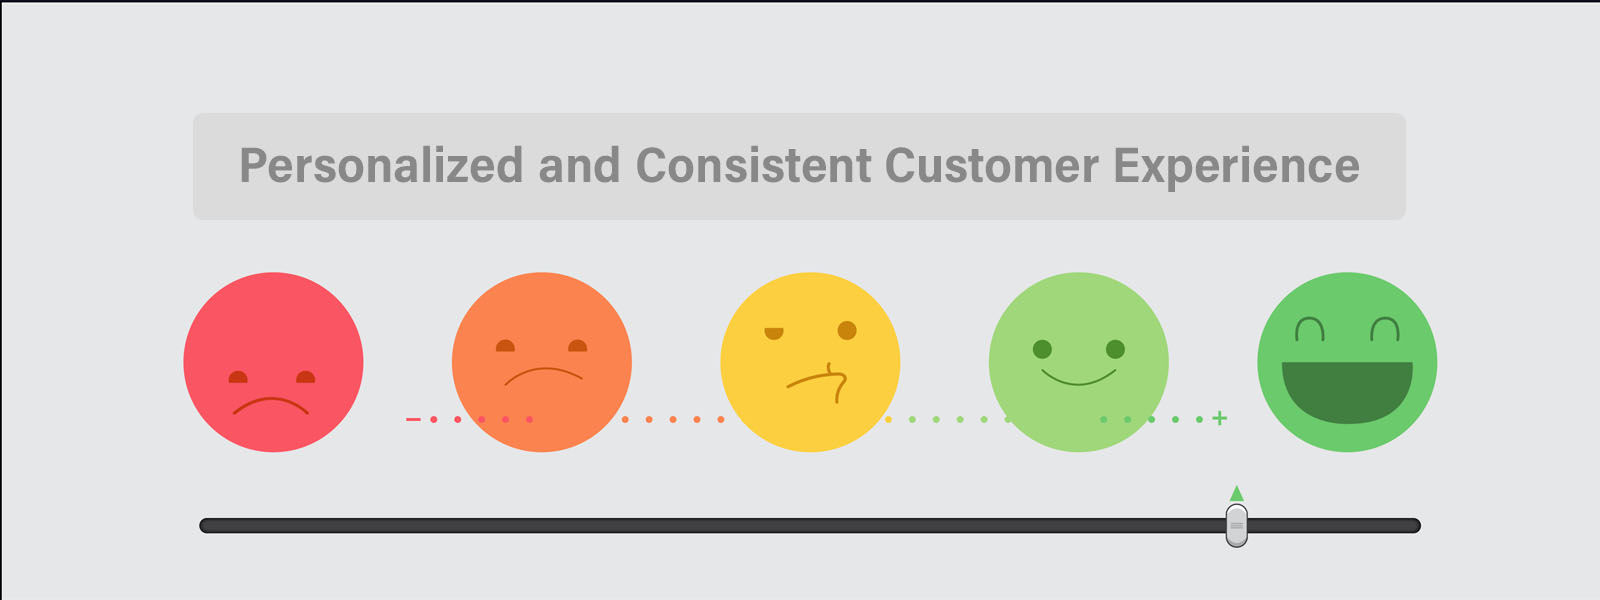 personalized and consistent customer service